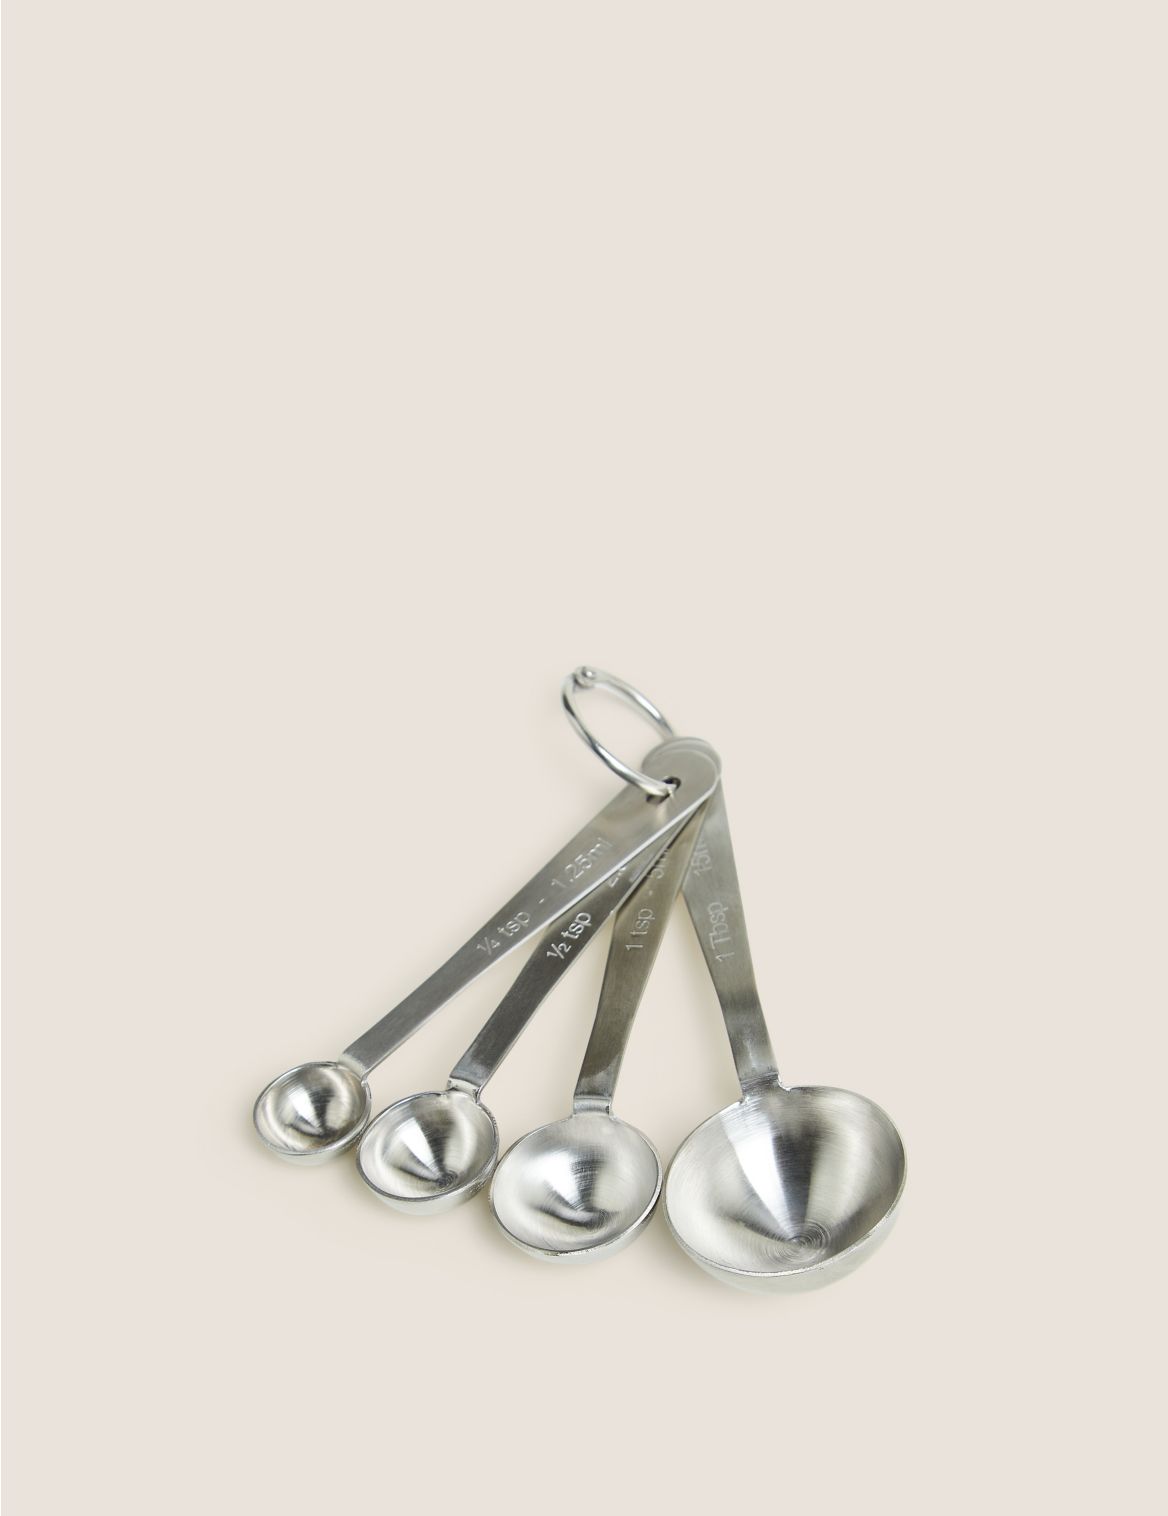 Set of 4 Stainless Steel Measuring Spoons silver